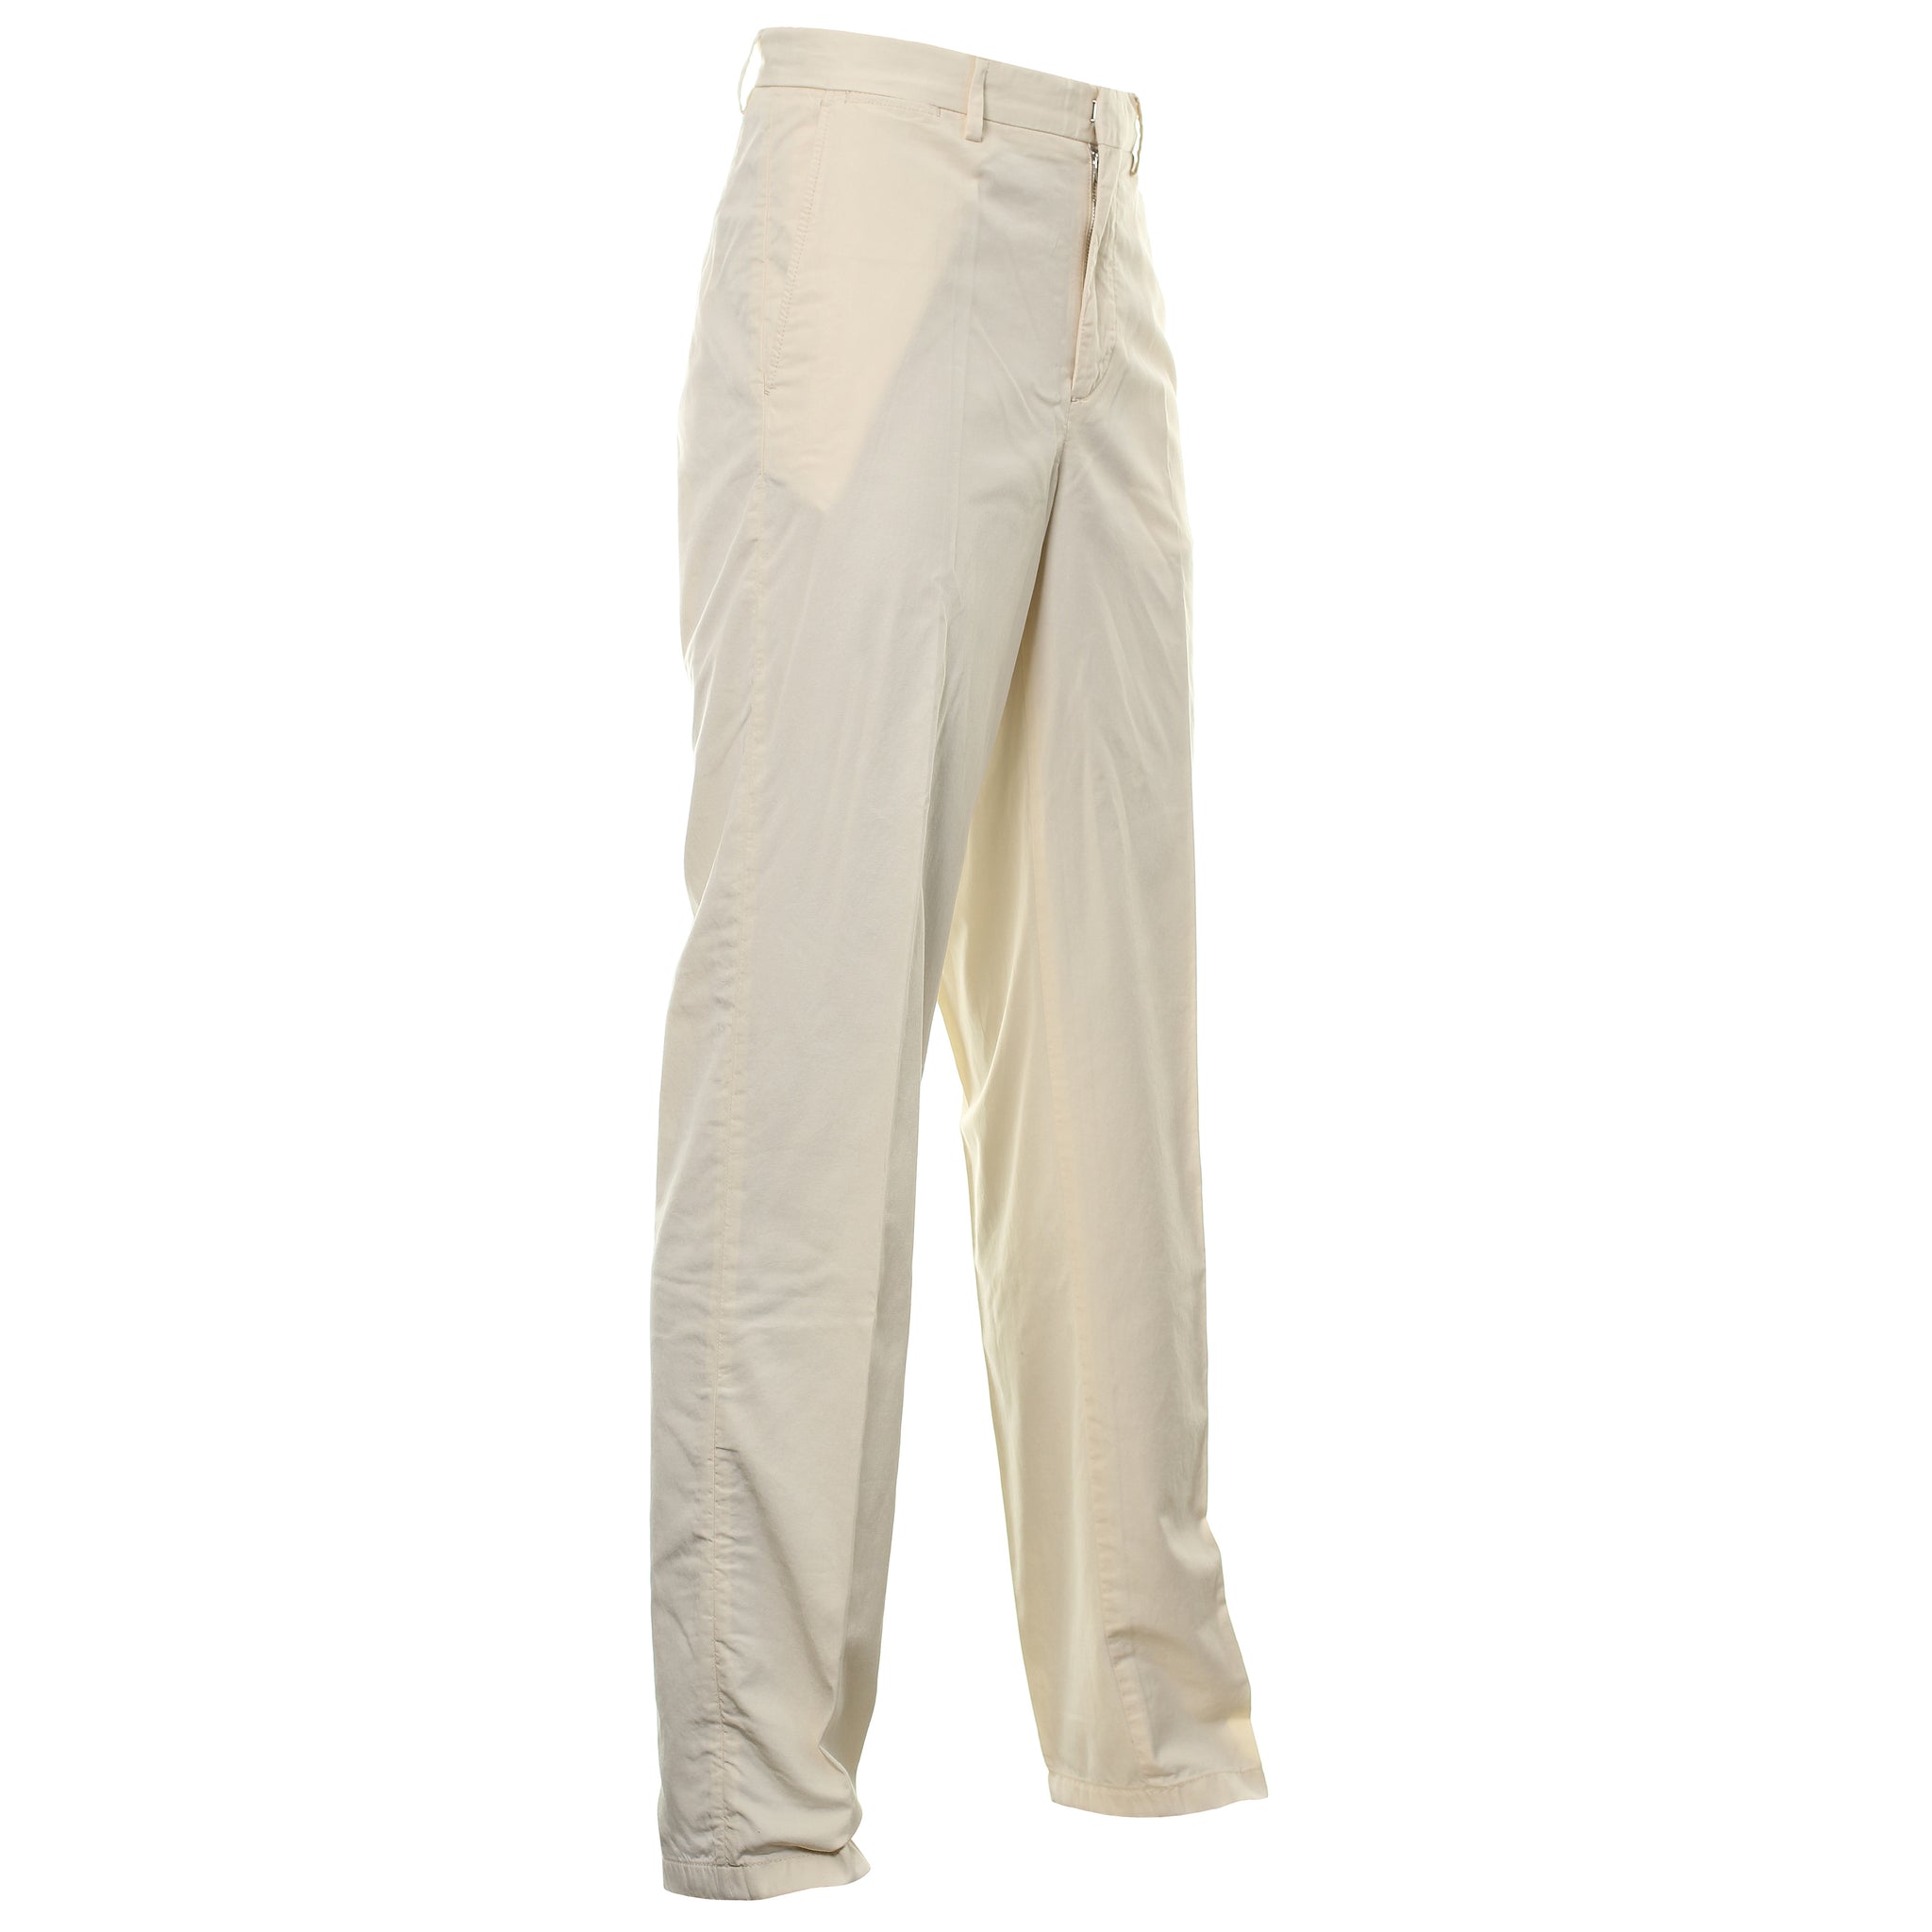 Lacoste Lightweight Chino Pants HH1053 Natural 056 | Function18 ...